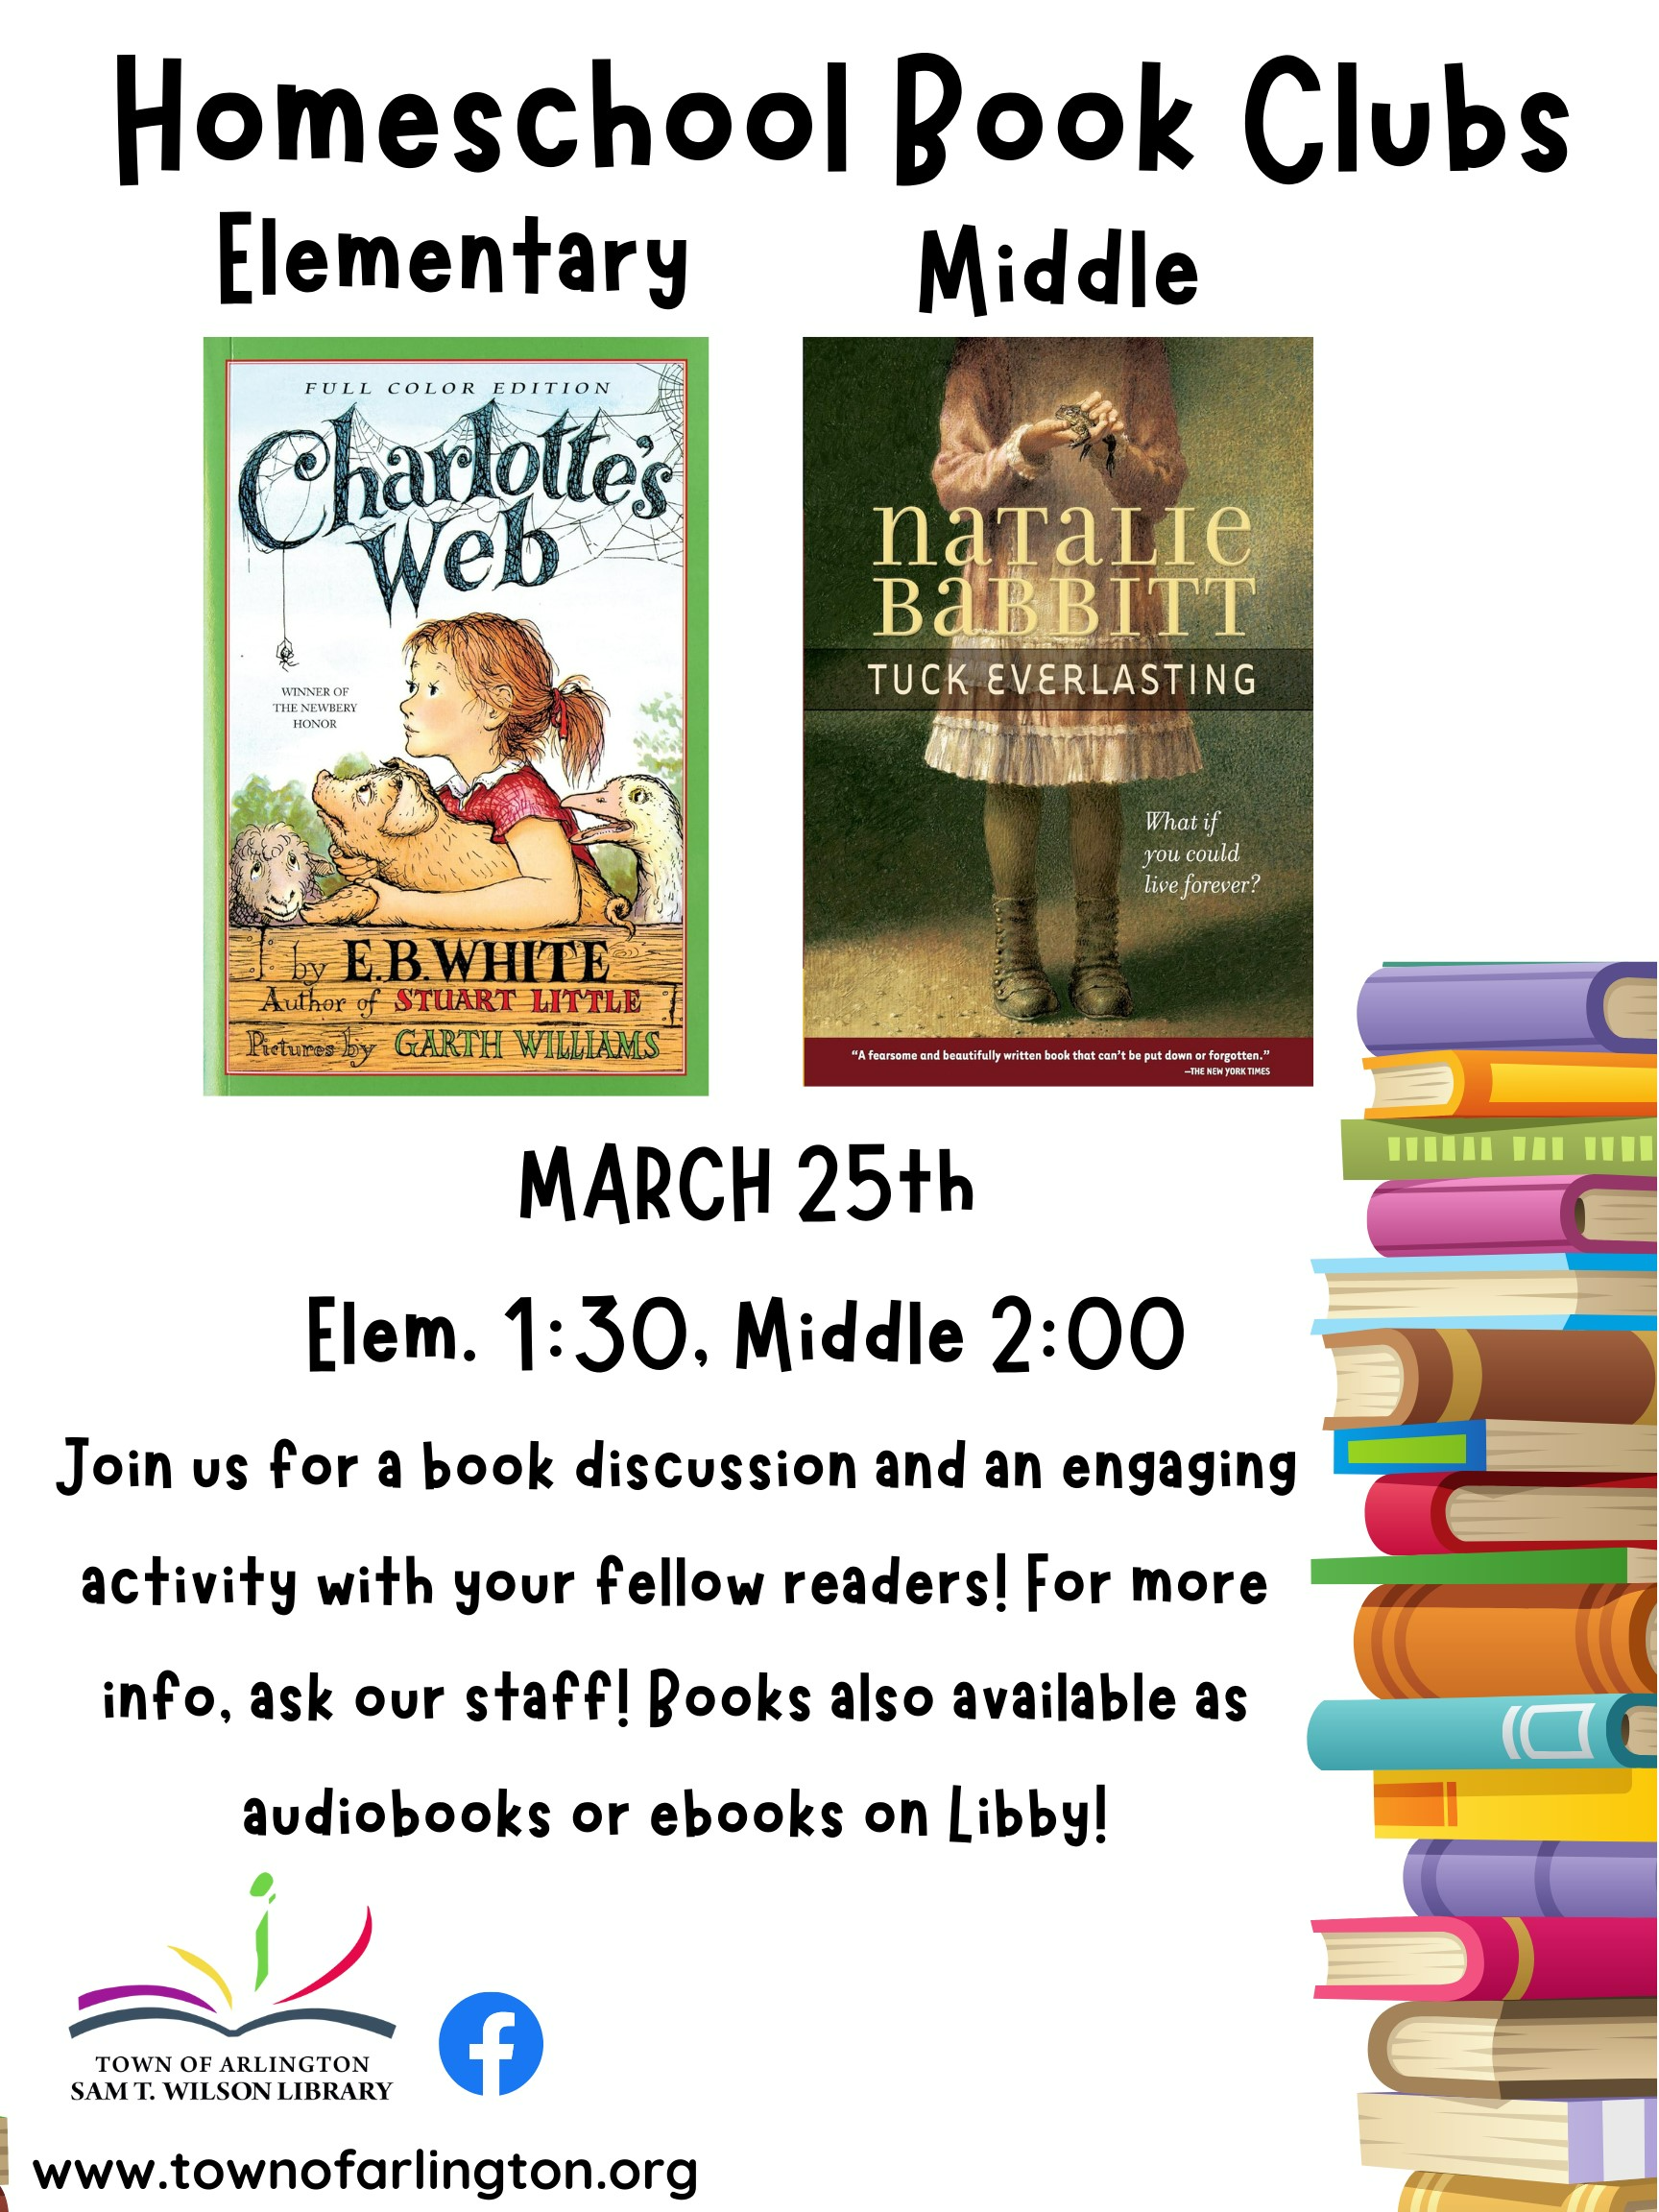 Homeschool Book Clubs, March 25th, 1:30pm elementary for Charlotte's web, 2pm middle for Tuck Everlasting